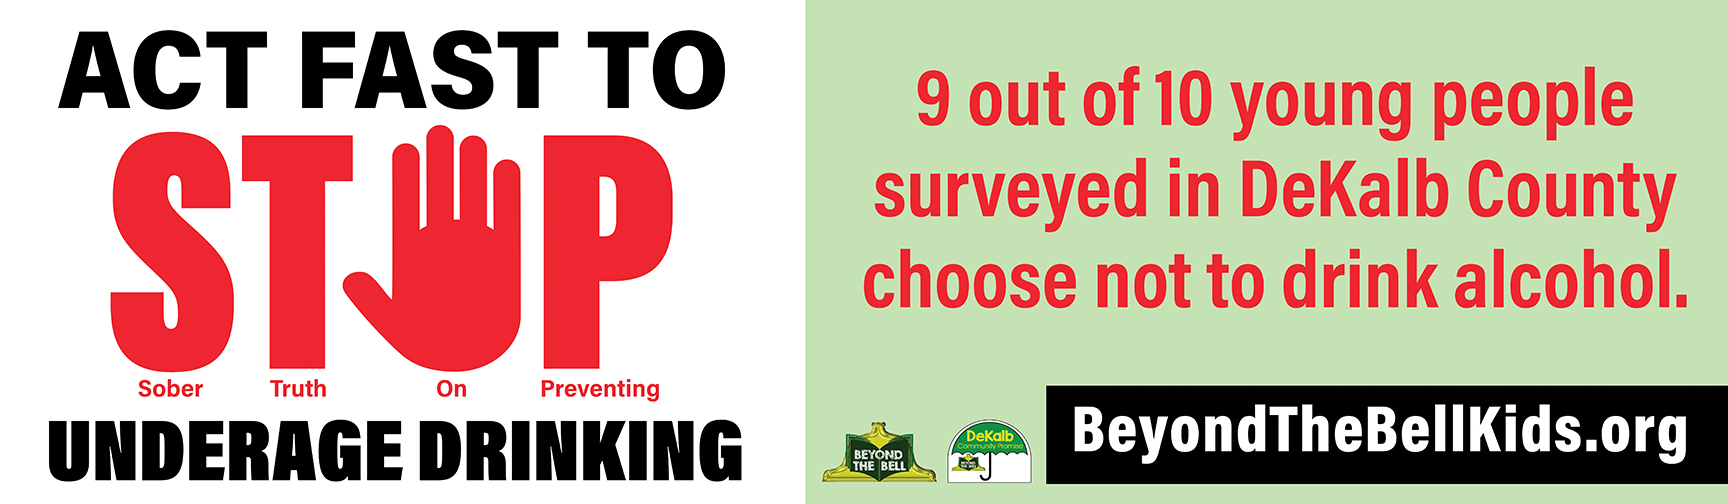 Red and black text on a white and green background. Act fast to stop underage drinking. 9 out of 10 young people surveyed in DeKalb County choose not to drink alcohol.